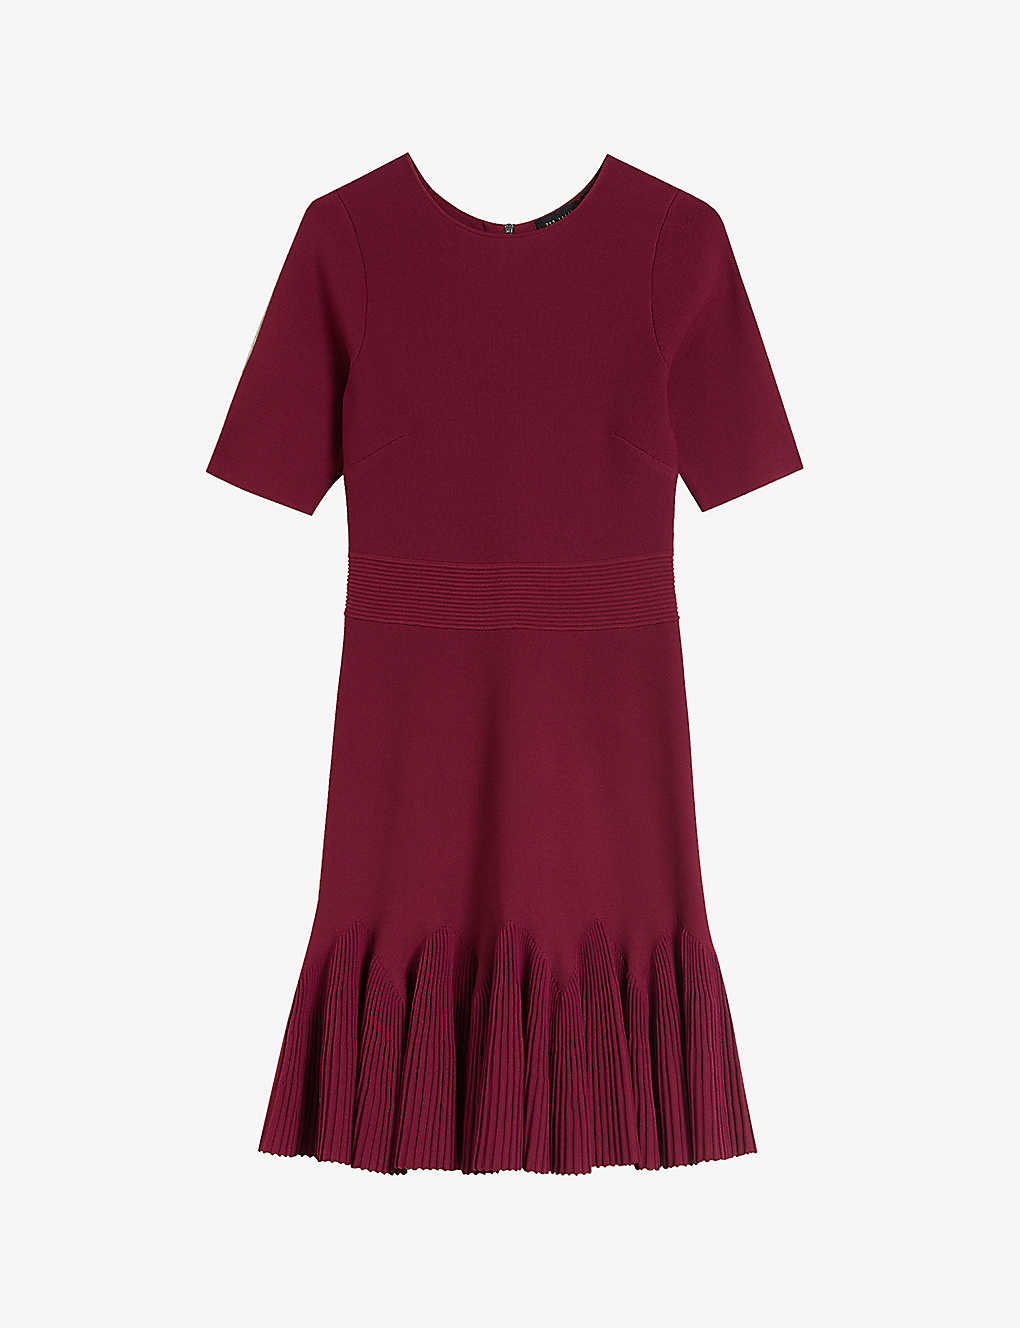 TED BAKER TED BAKER WOMENS DK-RED JOSAFEE SHORT-SLEEVE STRETCH-KNIT FIT-AND-FLARE MINI DRESS